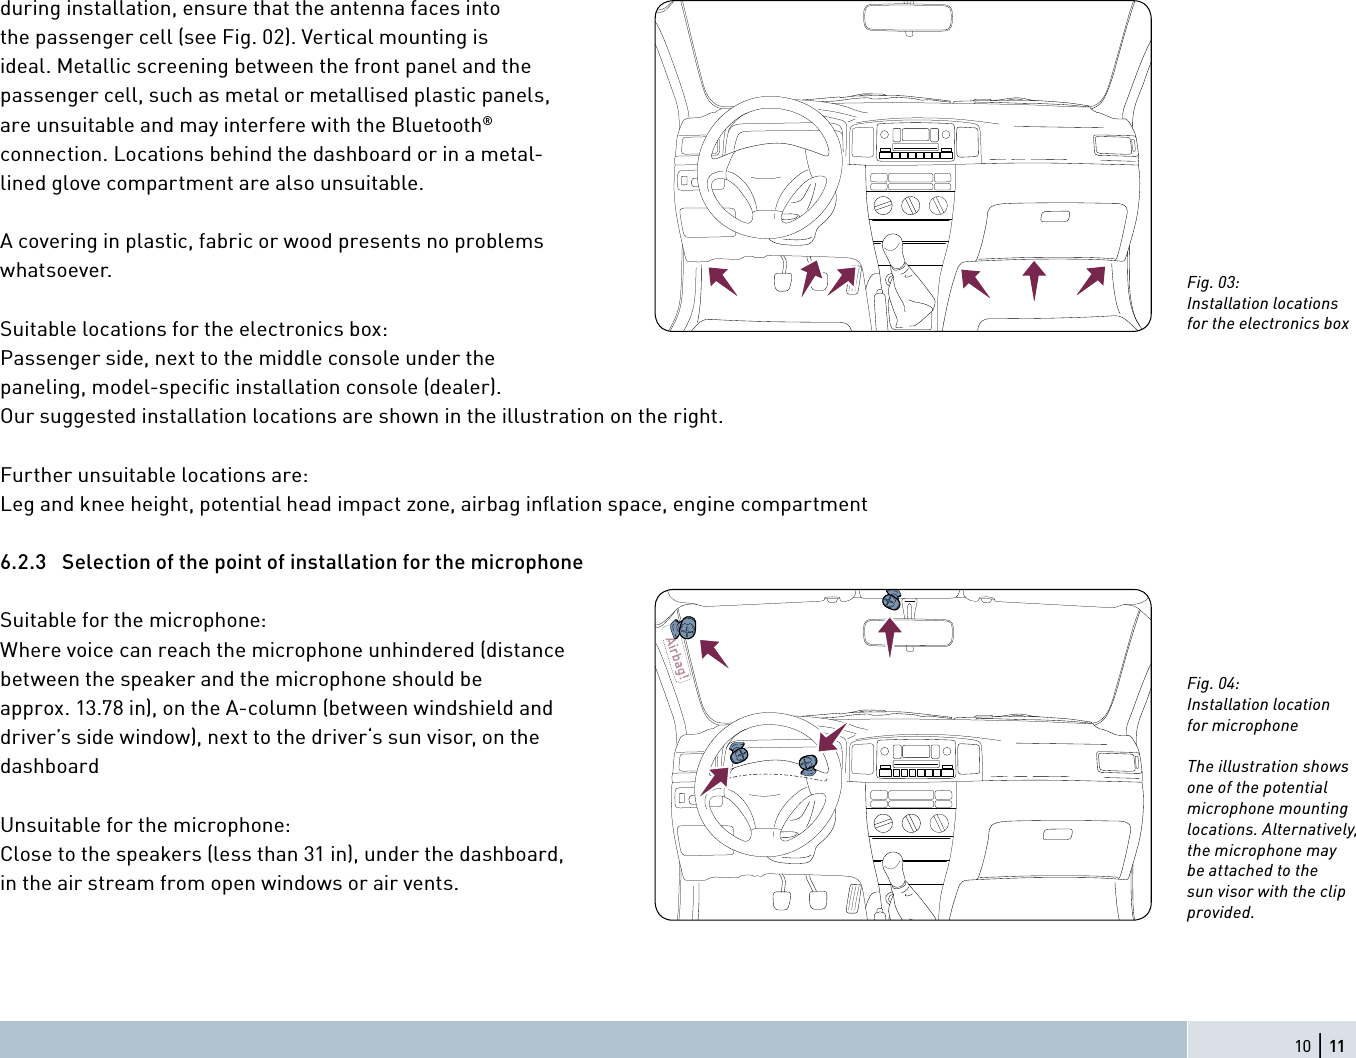 during installation, ensure that the antenna faces into the passenger cell (see Fig. 02). Vertical mounting is ideal. Metallic screening between the front panel and the passenger cell, such as metal or metallised plastic panels, are unsuitable and may interfere with the Bluetooth® connection. Locations behind the dashboard or in a metal-lined glove compartment are also unsuitable.A covering in plastic, fabric or wood presents no problems whatsoever.Suitable locations for the electronics box:Passenger side, next to the middle console under the paneling, model-speciﬁ c installation console (dealer). Our suggested installation locations are shown in the illustration on the right.Further unsuitable locations are:Leg and knee height, potential head impact zone, airbag inﬂ ation space, engine compartment6.2.3  Selection of the point of installation for the microphoneSuitable for the microphone:Where voice can reach the microphone unhindered (distance between the speaker and the microphone should be approx. 13.78 in), on the A-column (between windshield and driver’s side window), next to the driver‘s sun visor, on the dashboard Unsuitable for the microphone:Close to the speakers (less than 31 in), under the dashboard, in the air stream from open windows or air vents.10 | 11Fig. 03:Installation locationsfor the electronics box Fig. 04:Installation locationfor microphoneThe illustration shows one of the potential microphone mounting locations. Alternatively, the microphone may be attached to the sun visor with the clip provided.